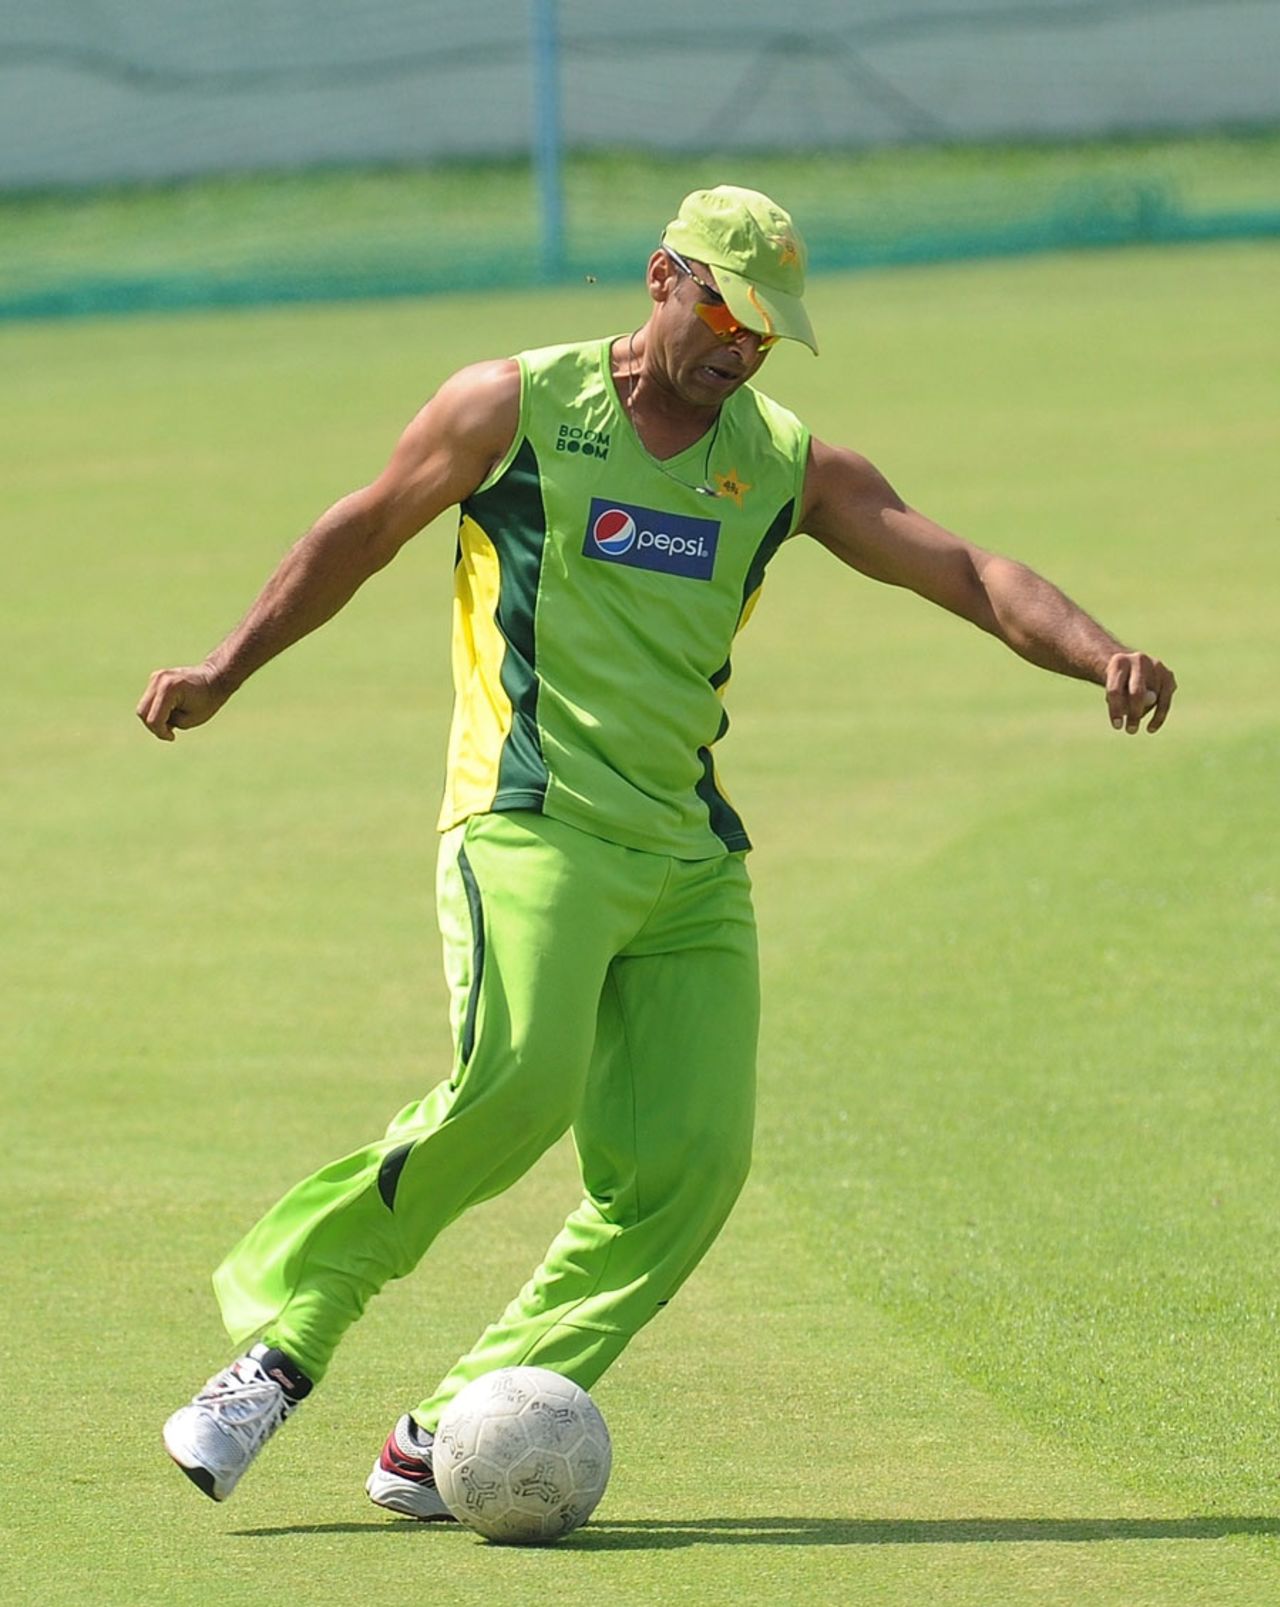 Shoaib Akhtar in action during a warm-up game of football, Mohali, March 27, 2011